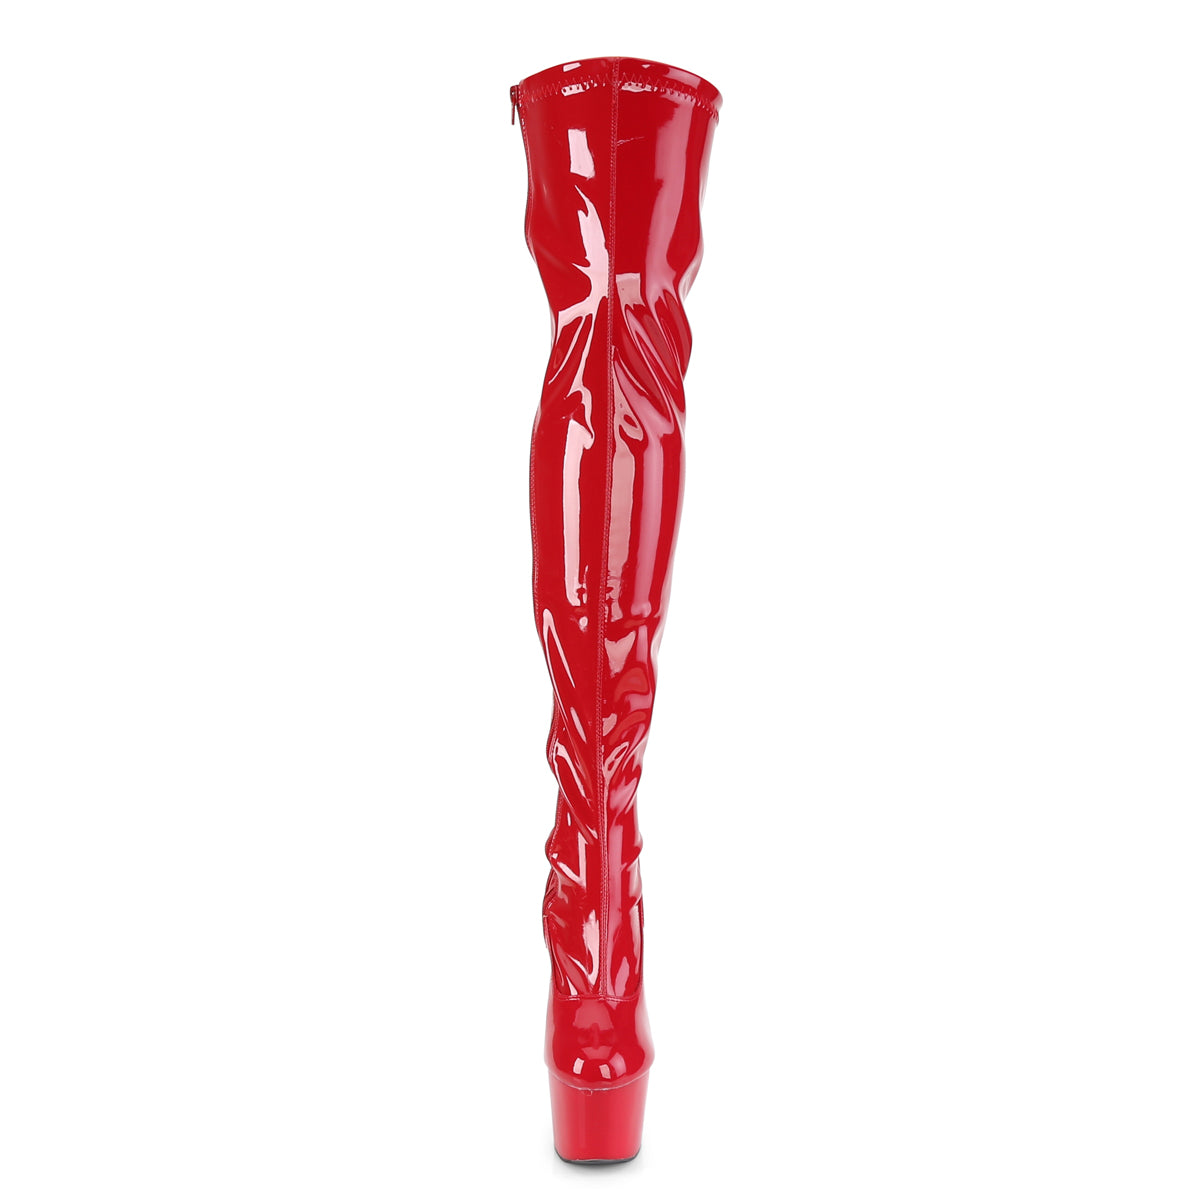 ADORE-3000 / R / M 7 "PLEASER FAST DELIVERY 24-48h 